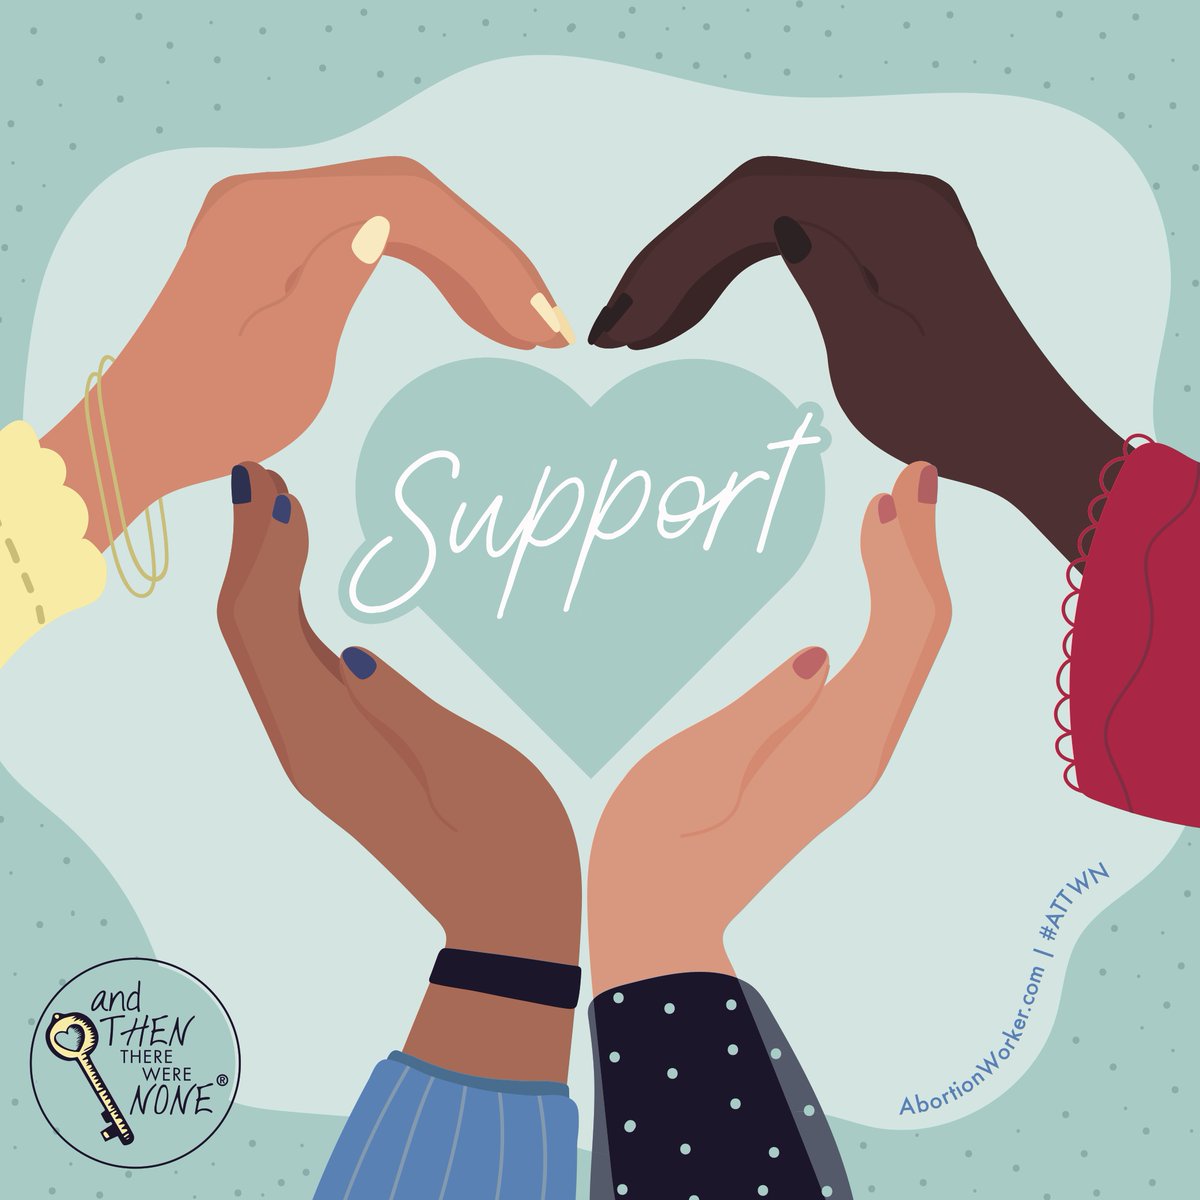 We’re ready to help #abortionworkers become Quitters with a vast support system of resources and a loving tribe who “gets it.” 

Ready to quit? Lean on us. We’re stronger together!